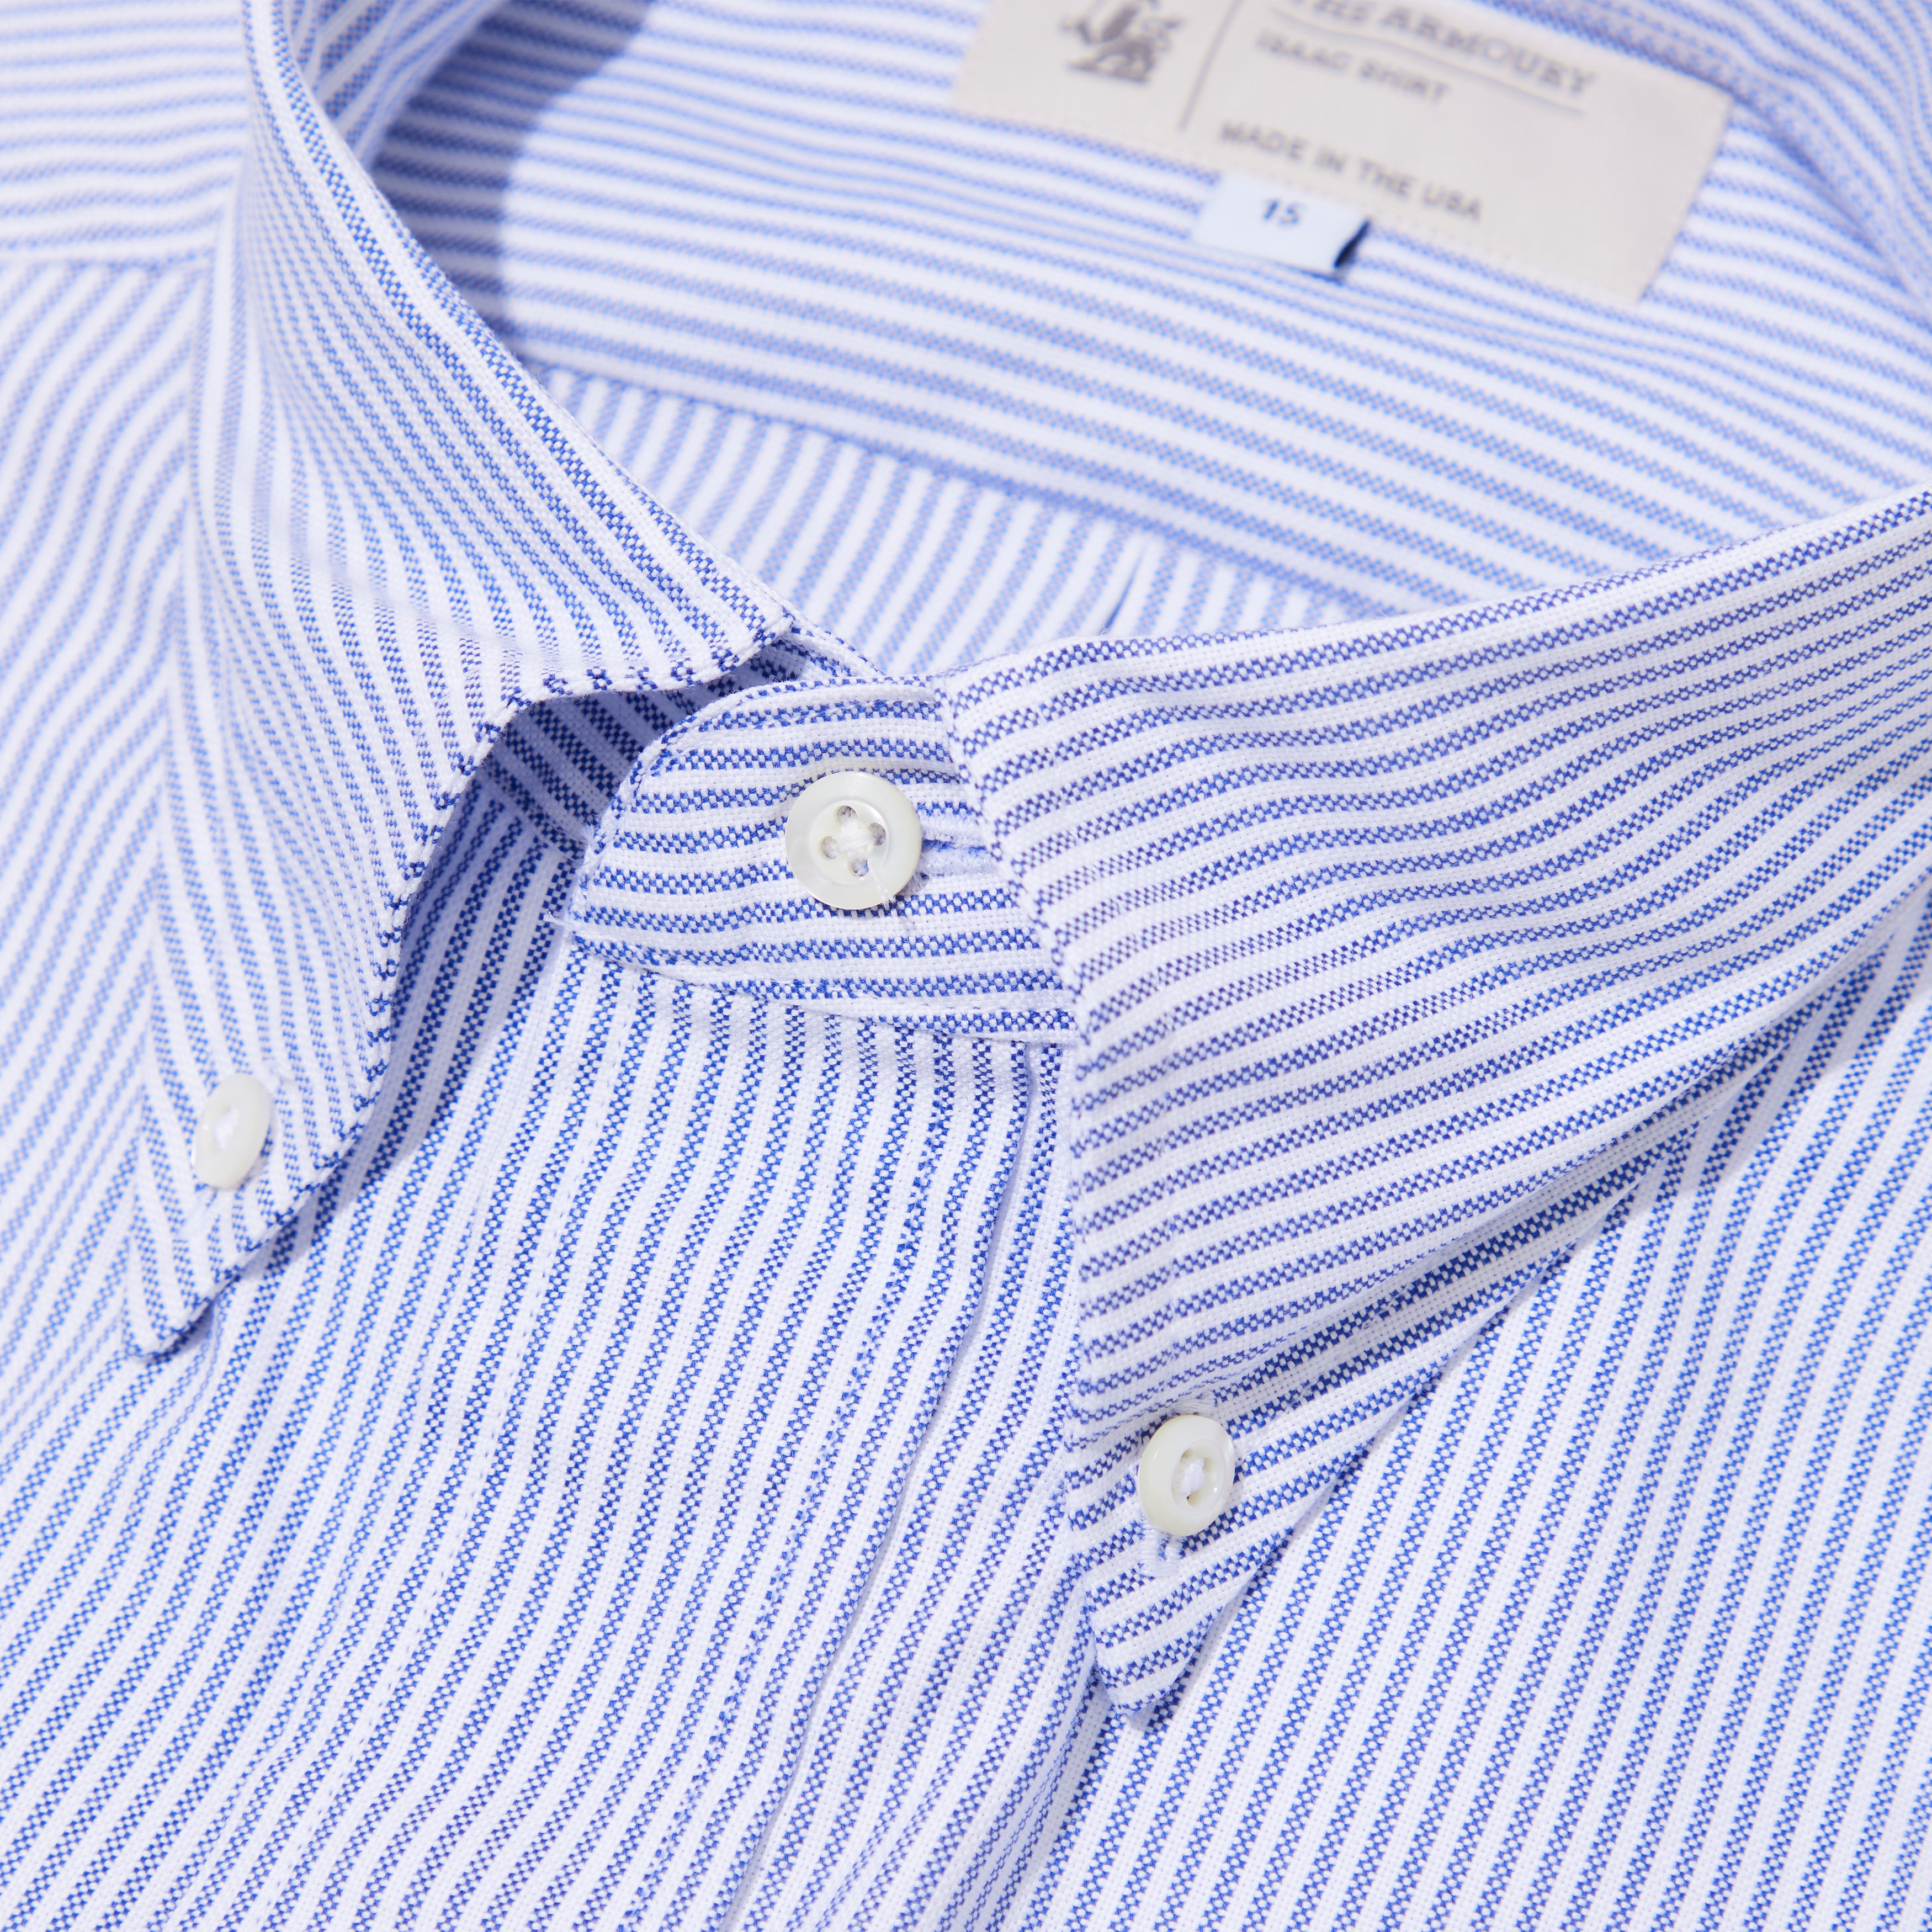 Oxford Button-down Shirt - The Armoury